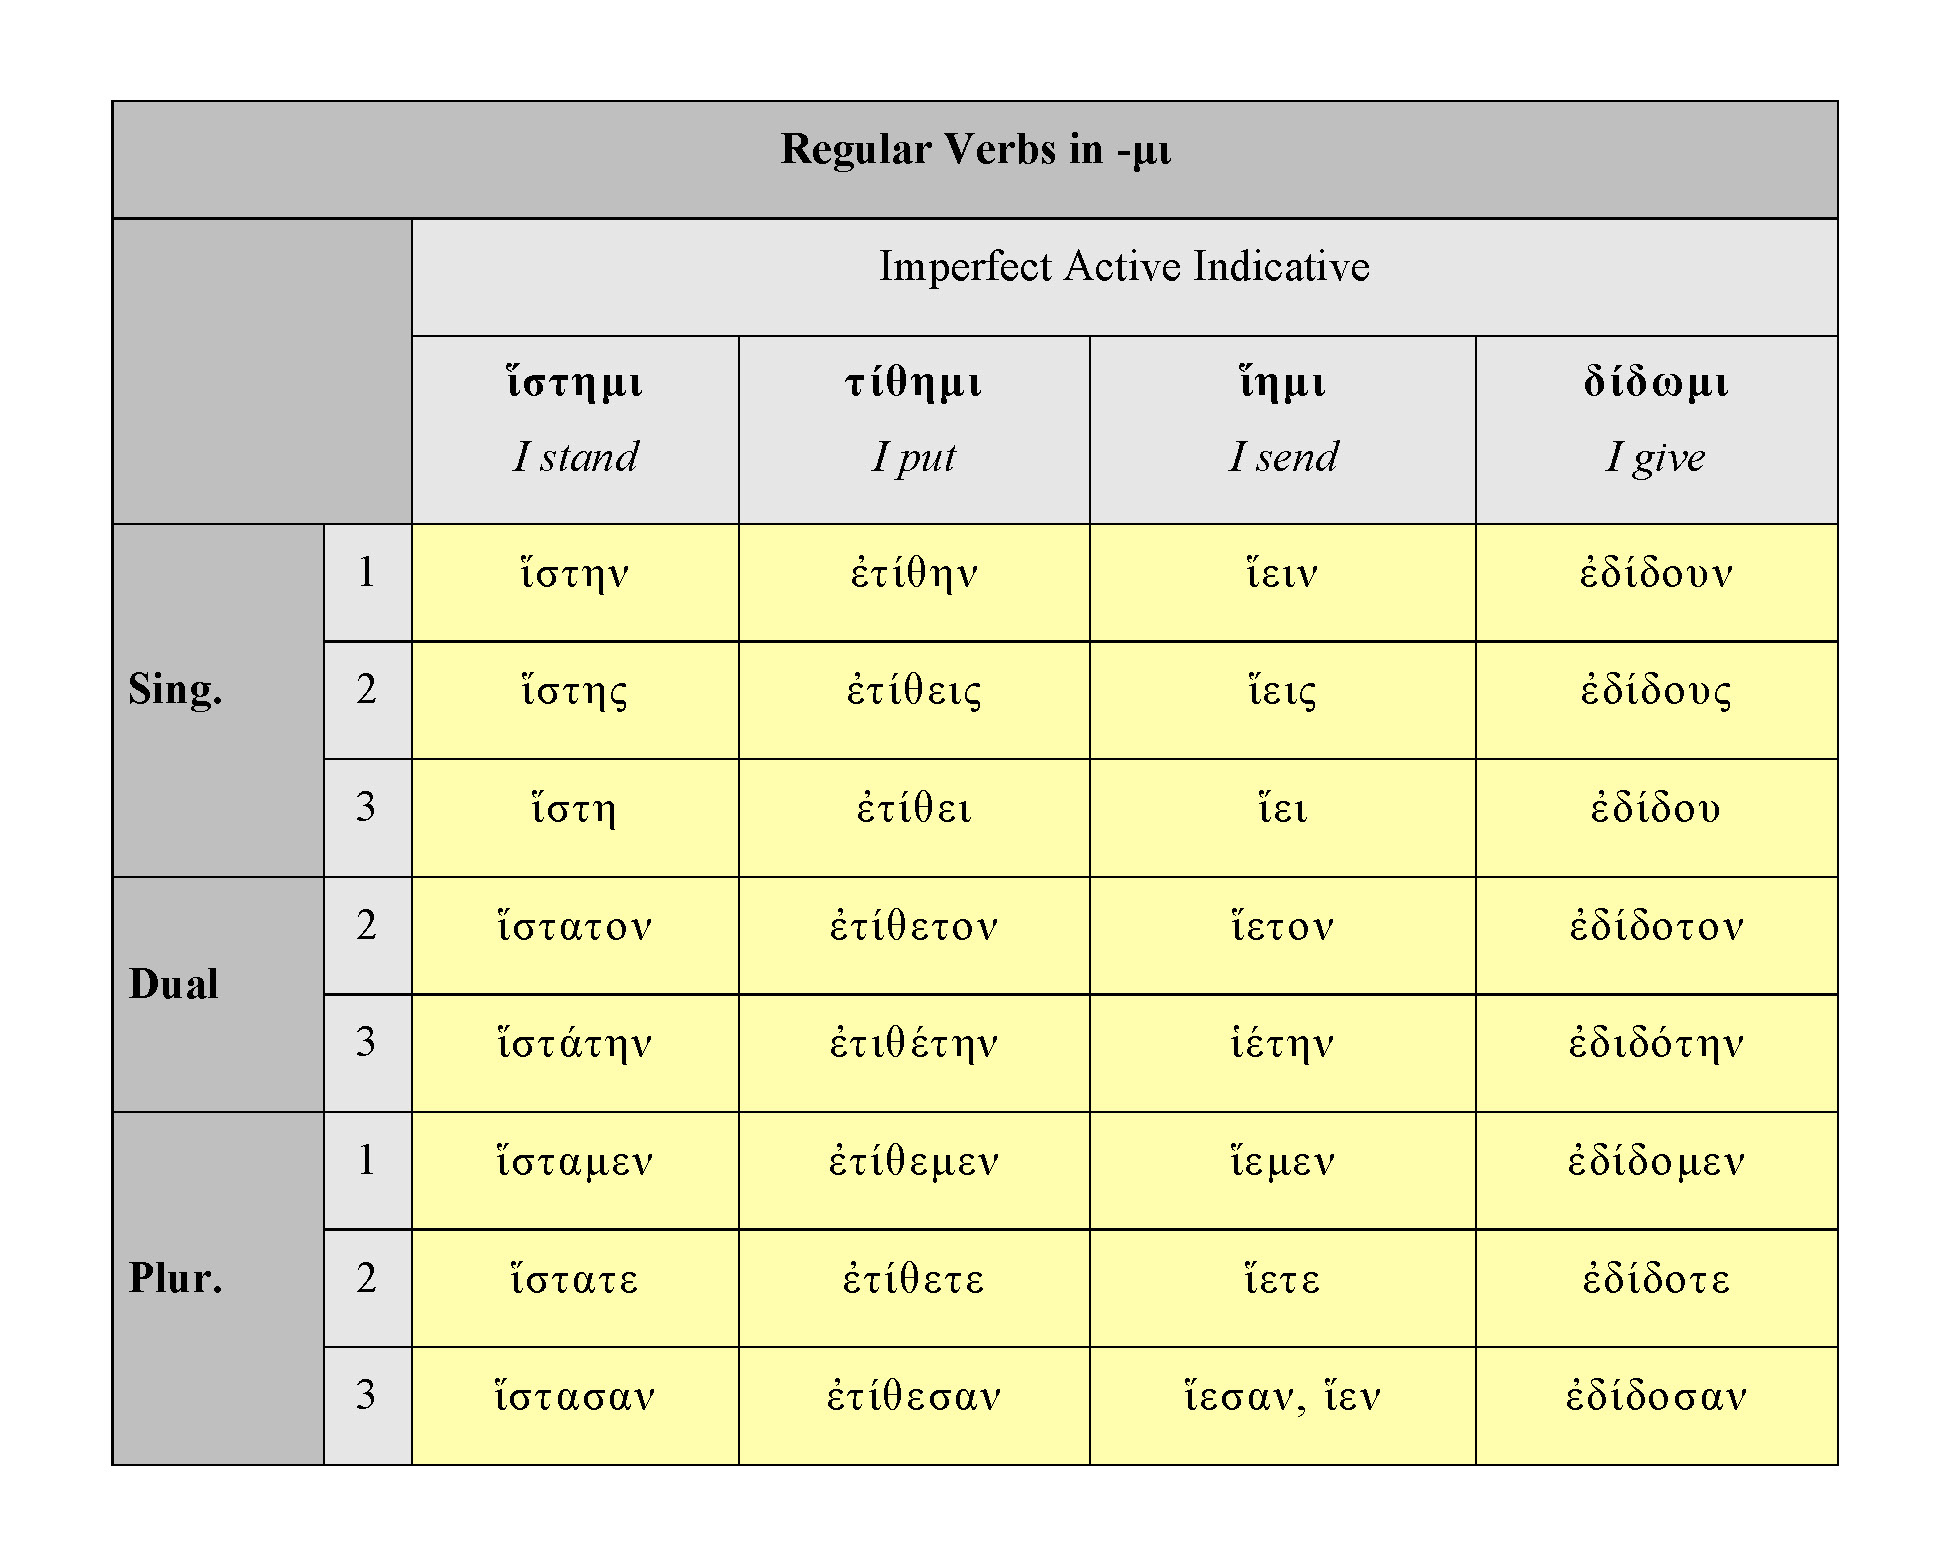 HOMERIC VERBS: -ΜΙ IMPERFECT ACTIVE INDICATIVE